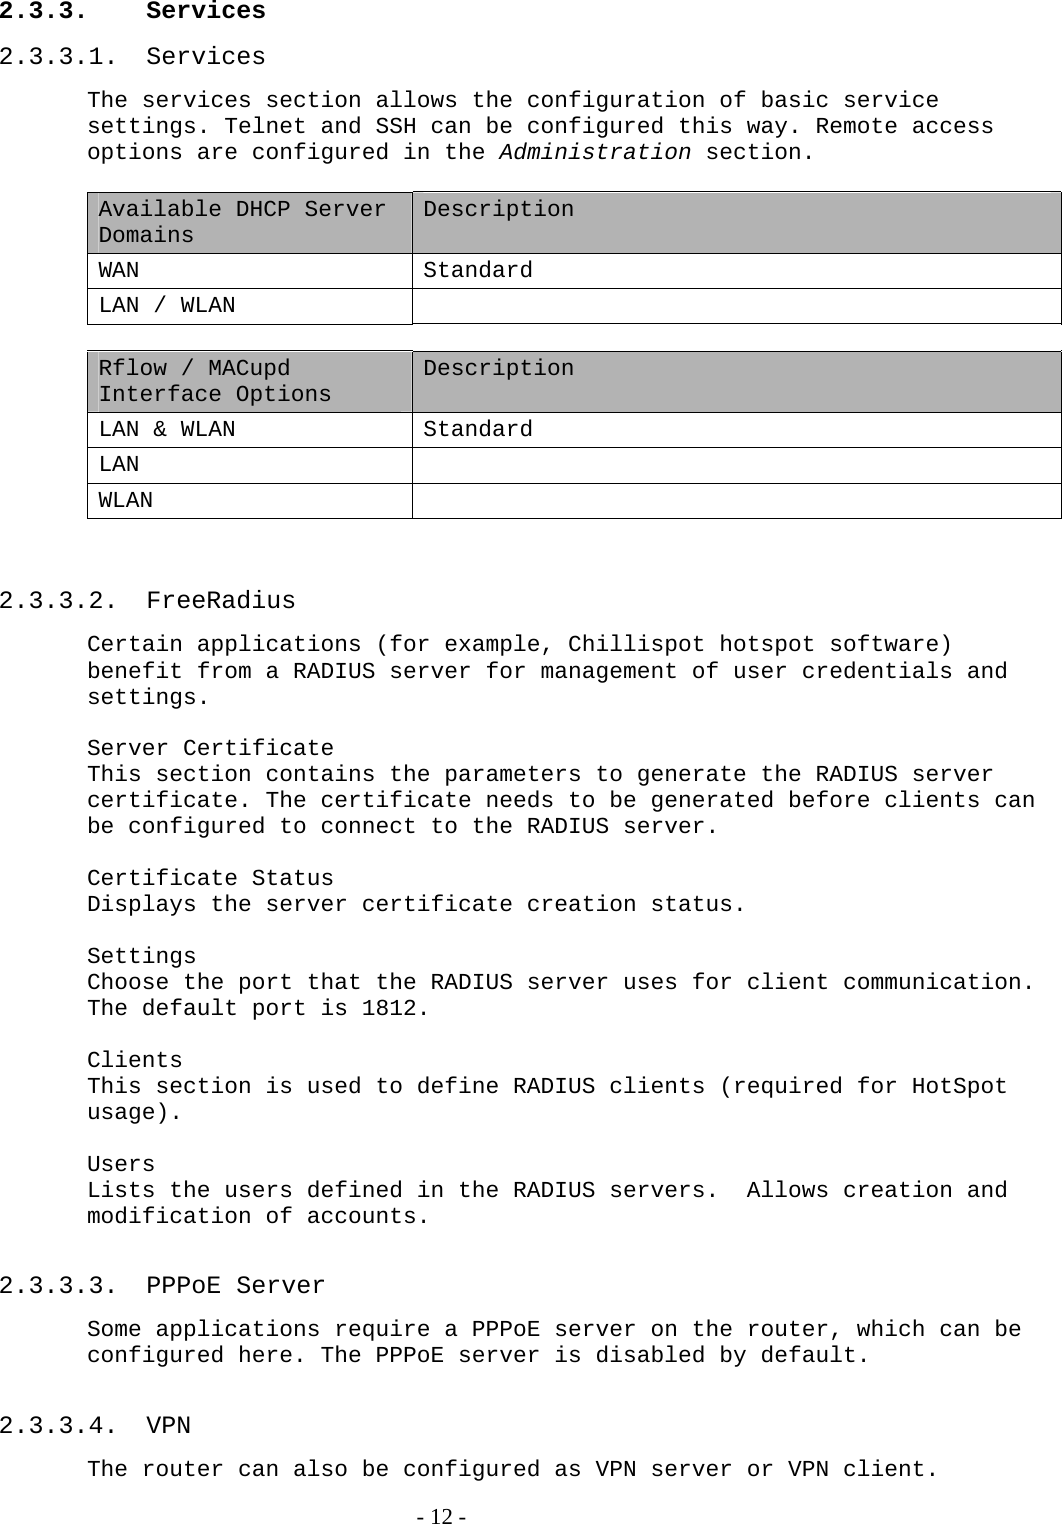 2.3.3. Services 2.3.3.1. Services The services section allows the configuration of basic service settings. Telnet and SSH can be configured this way. Remote access options are configured in the Administration section.   Available DHCP Server Domains Description WAN Standard LAN / WLAN    Rflow / MACupd Interface Options Description LAN &amp; WLAN  Standard LAN  WLAN    2.3.3.2. FreeRadius Certain applications (for example, Chillispot hotspot software) benefit from a RADIUS server for management of user credentials and settings.  Server Certificate This section contains the parameters to generate the RADIUS server certificate. The certificate needs to be generated before clients can be configured to connect to the RADIUS server.  Certificate Status Displays the server certificate creation status.  Settings Choose the port that the RADIUS server uses for client communication.  The default port is 1812.  Clients This section is used to define RADIUS clients (required for HotSpot usage).  Users Lists the users defined in the RADIUS servers.  Allows creation and modification of accounts.  2.3.3.3. PPPoE Server Some applications require a PPPoE server on the router, which can be configured here. The PPPoE server is disabled by default.   2.3.3.4. VPN The router can also be configured as VPN server or VPN client.   - 12 - 